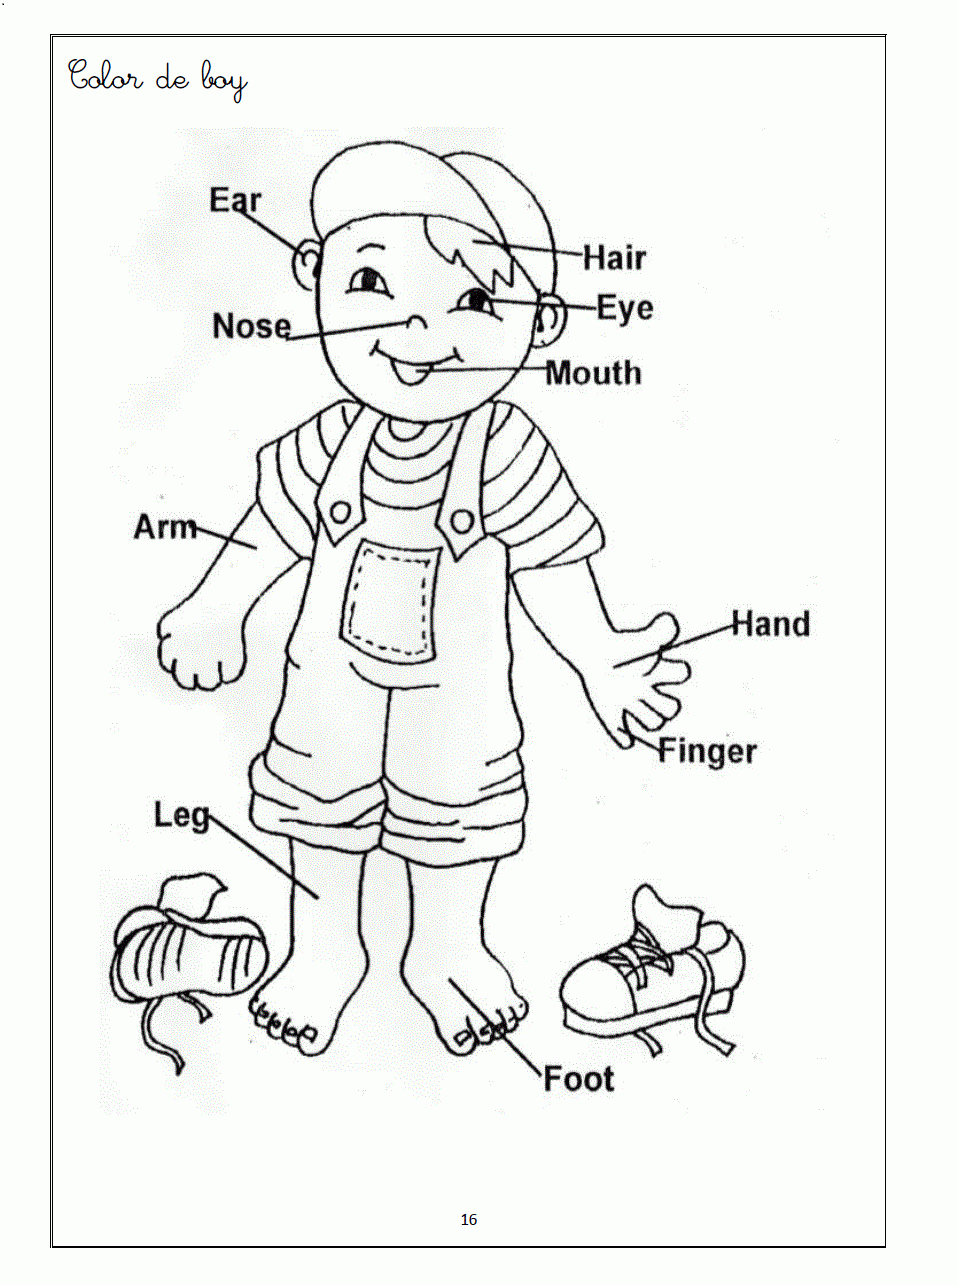 Body Parts Coloring Pages Printables | High Quality Coloring